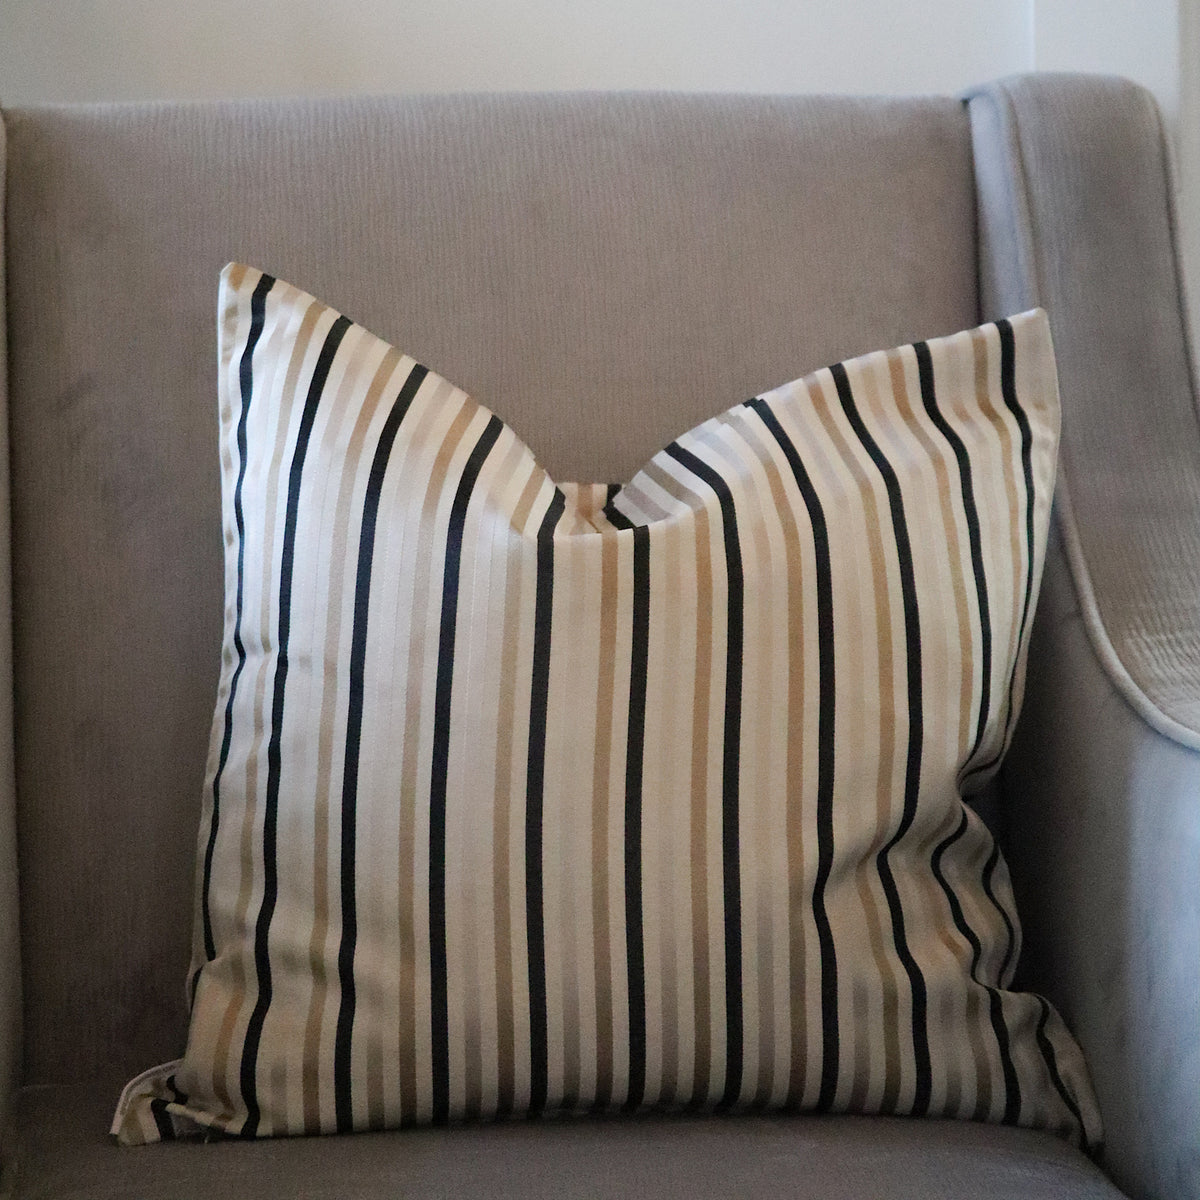 20 x 20 Pattern Pillow Cover